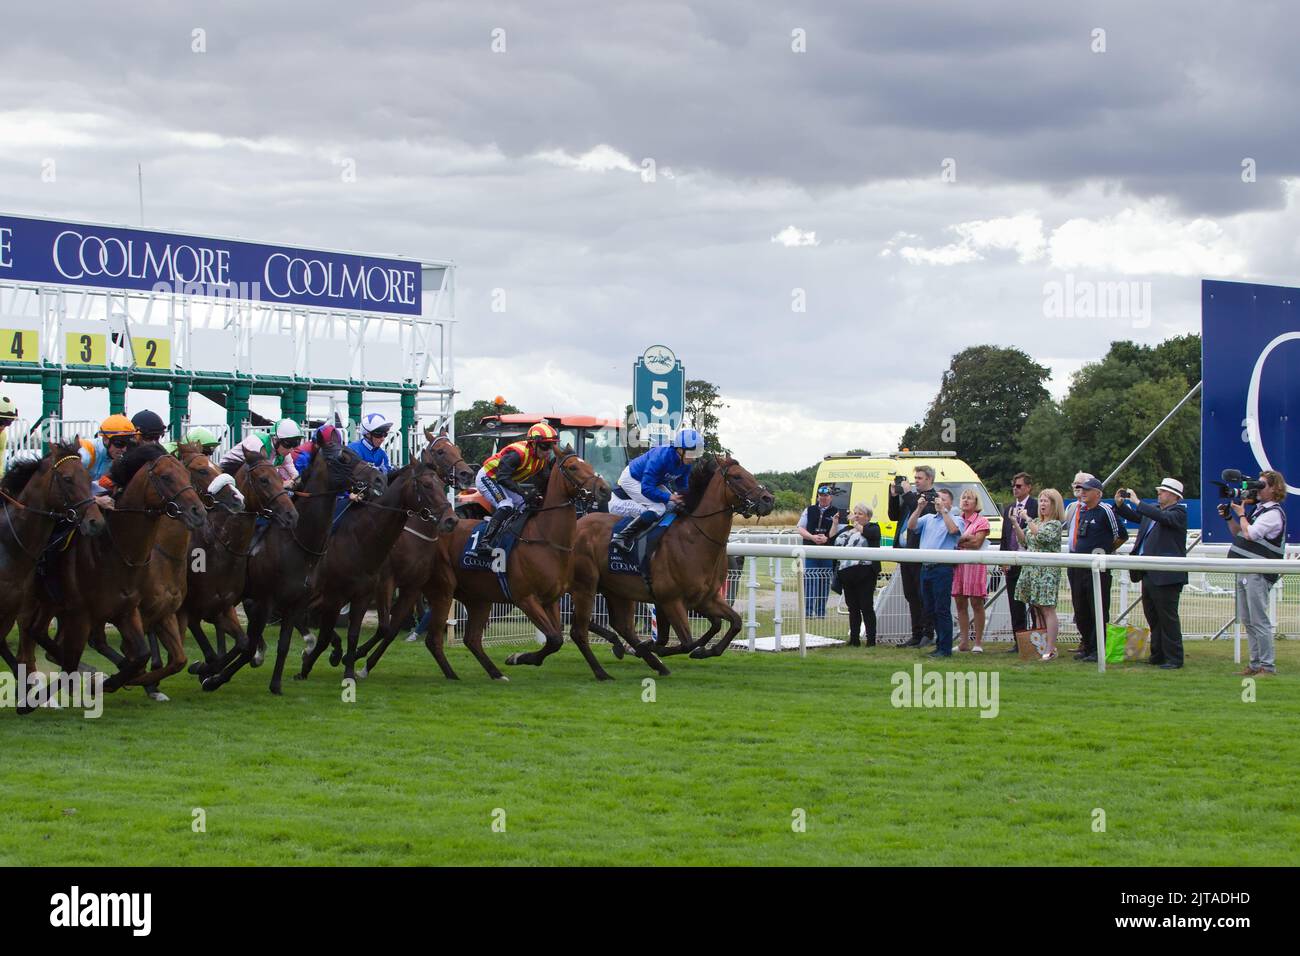 Jockeys and their horses leave the starting gates during the Coolmore Wootton Bassett Nunthorpe Stakes as spectators and a camera crew look on. Stock Photo